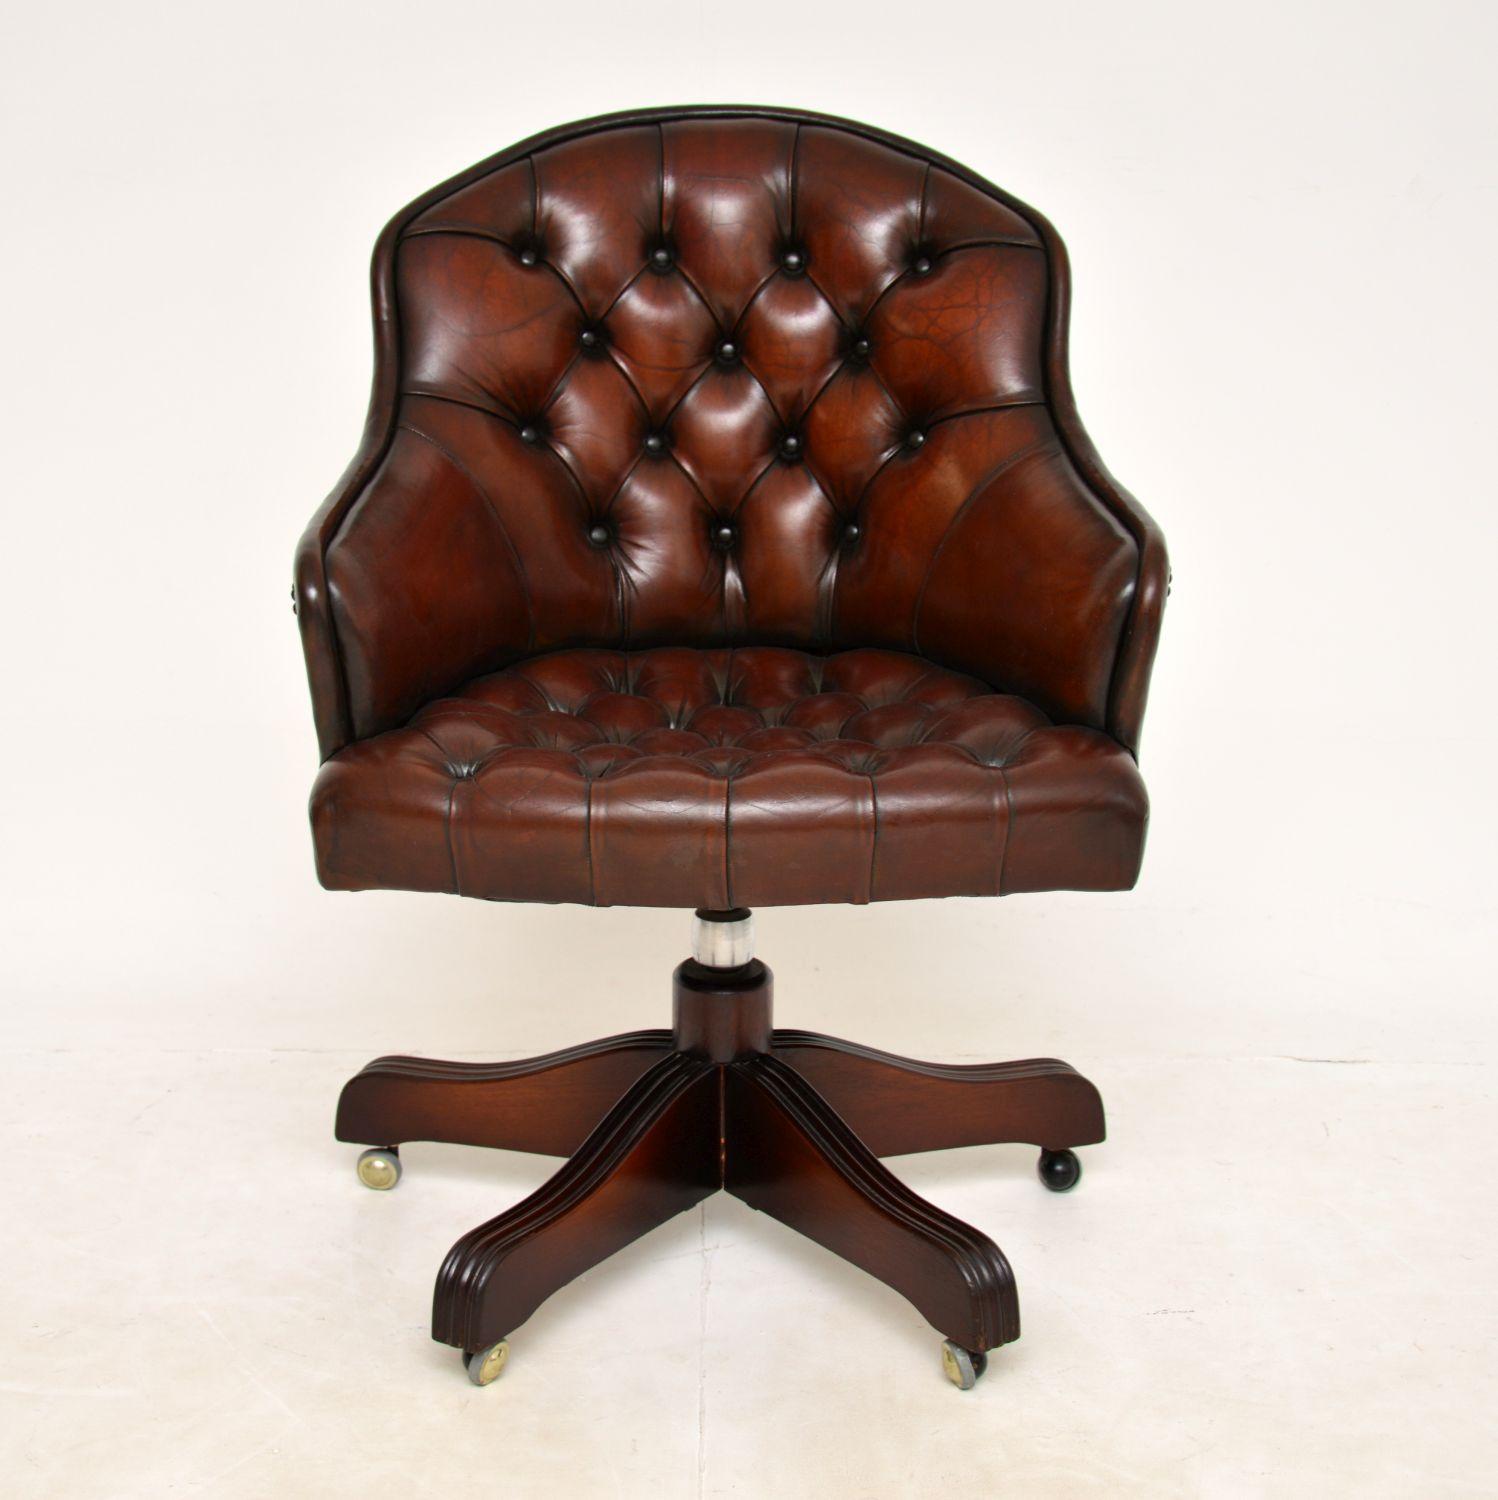 A fantastic deep buttoned leather swivel desk chair in the antique Victorian style. This was made in England, it dates from around the 1950’s period.

The quality is excellent, this is very comfortable and its a useful size. The leather has a